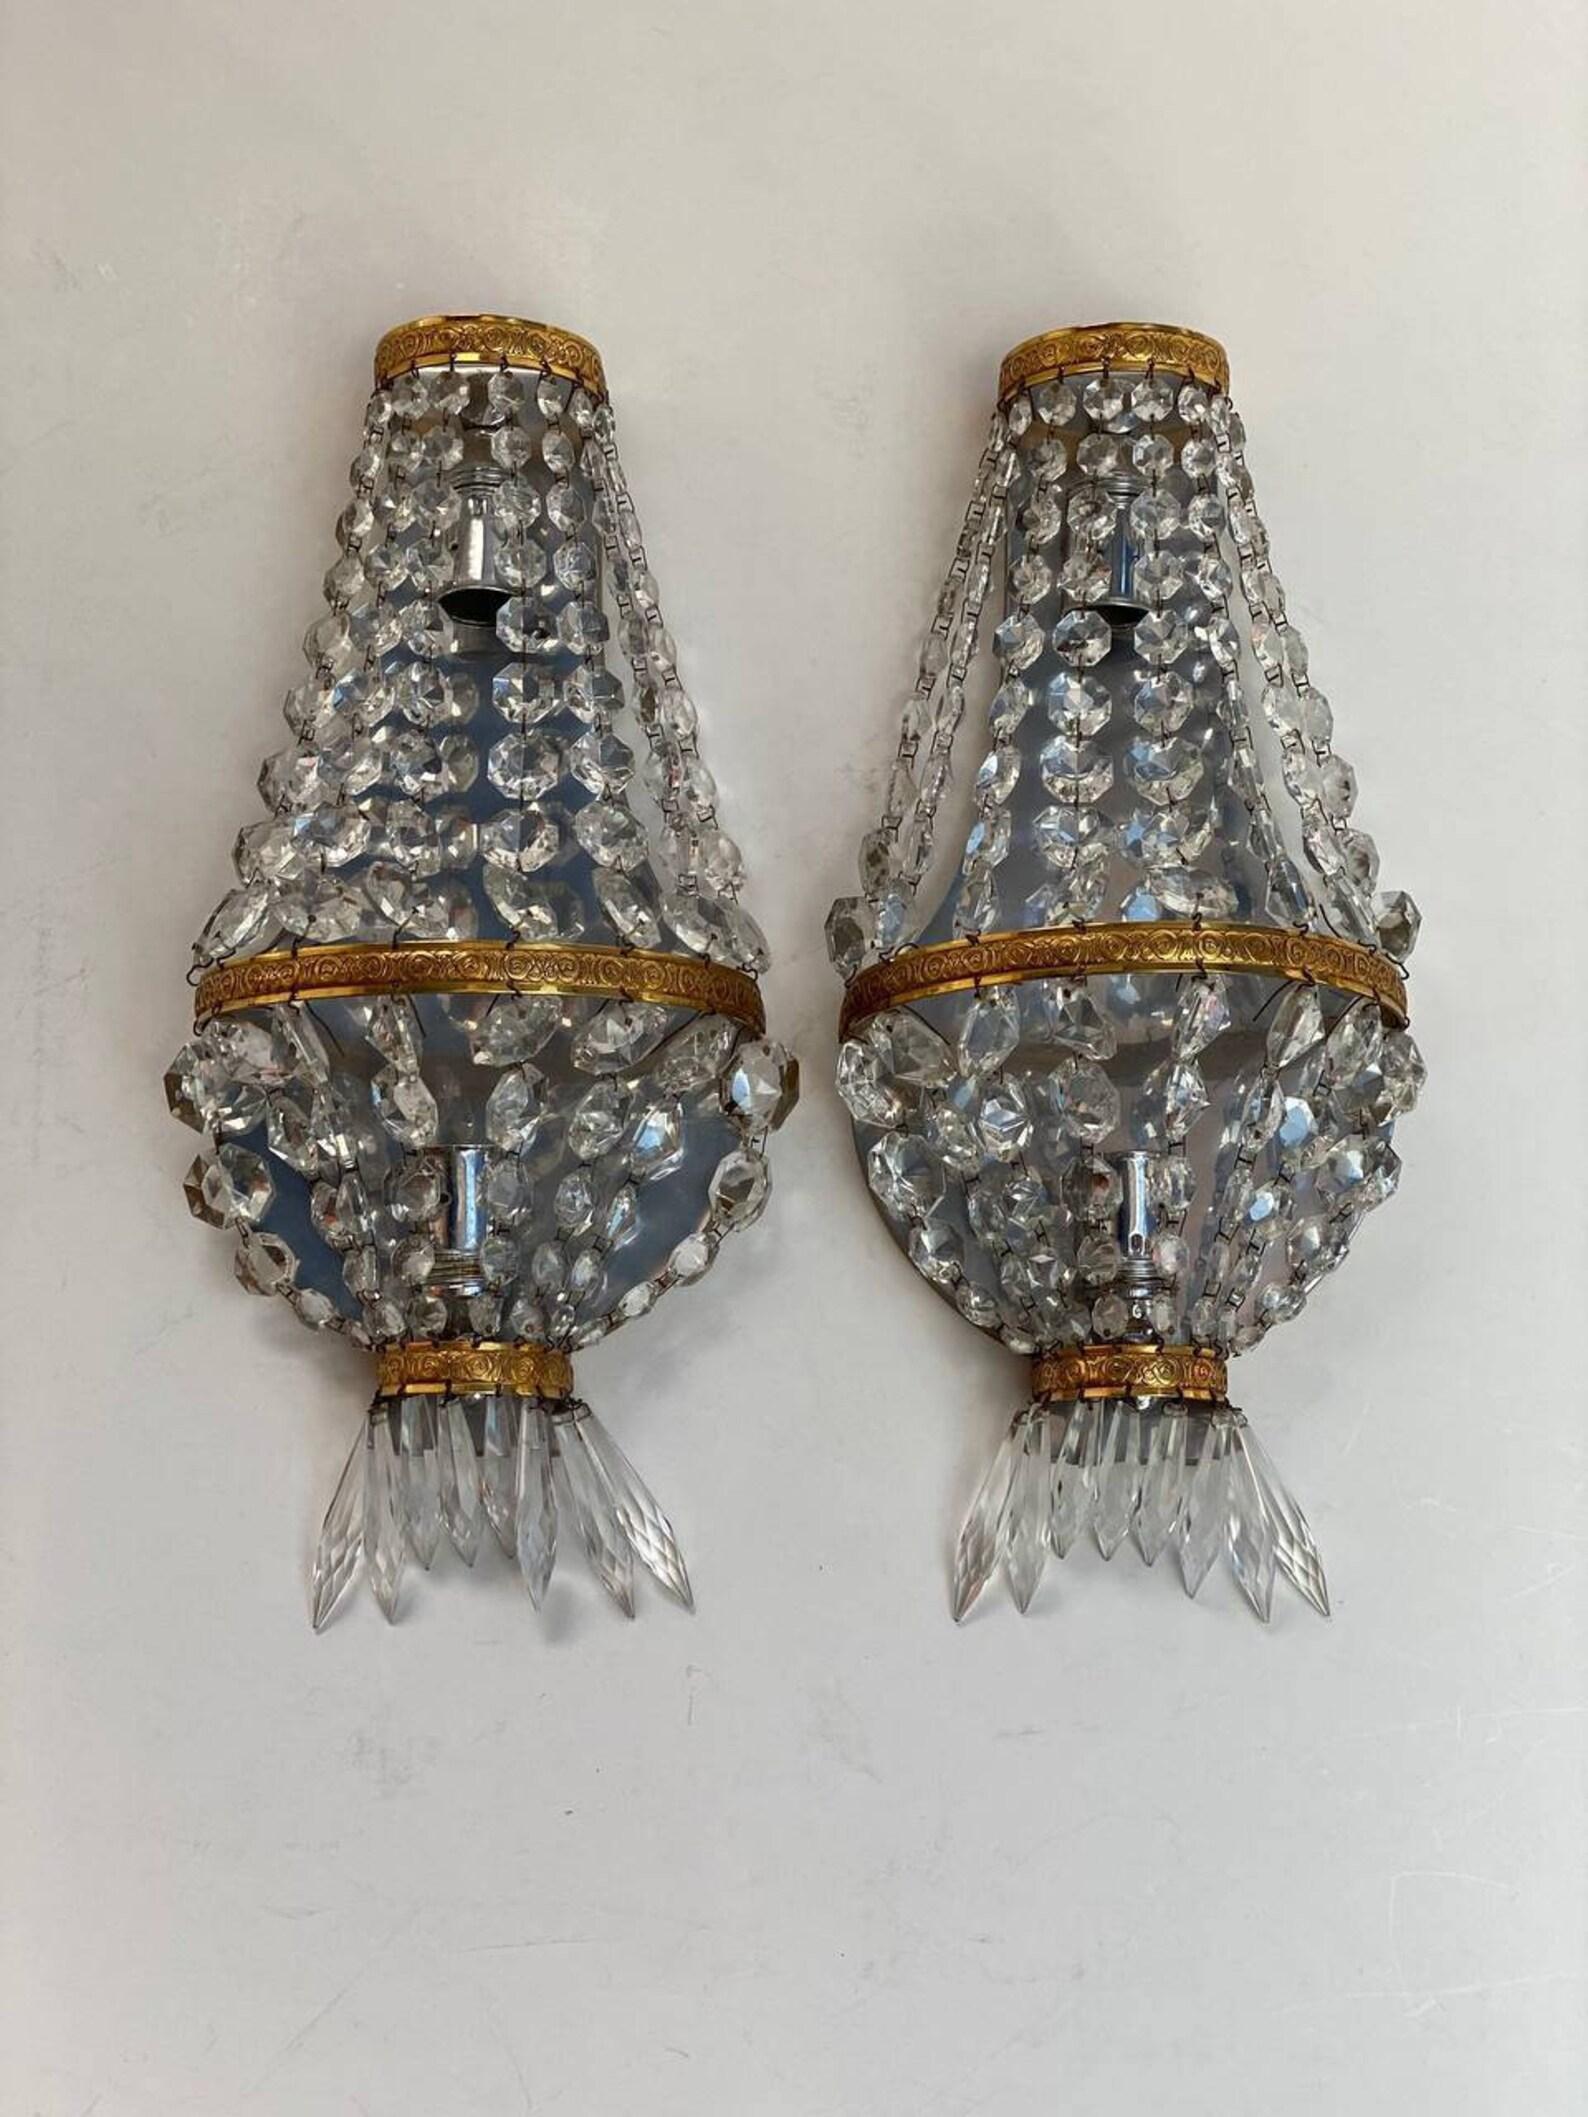 Magnificent vintage crystal lamps in the Empire style, a charming classic from France, 1960s.

 Crystal pendants together with shiny brass details give a chic shine to these sconces. Perfect for all types of classic interiors, in any room.

 Without